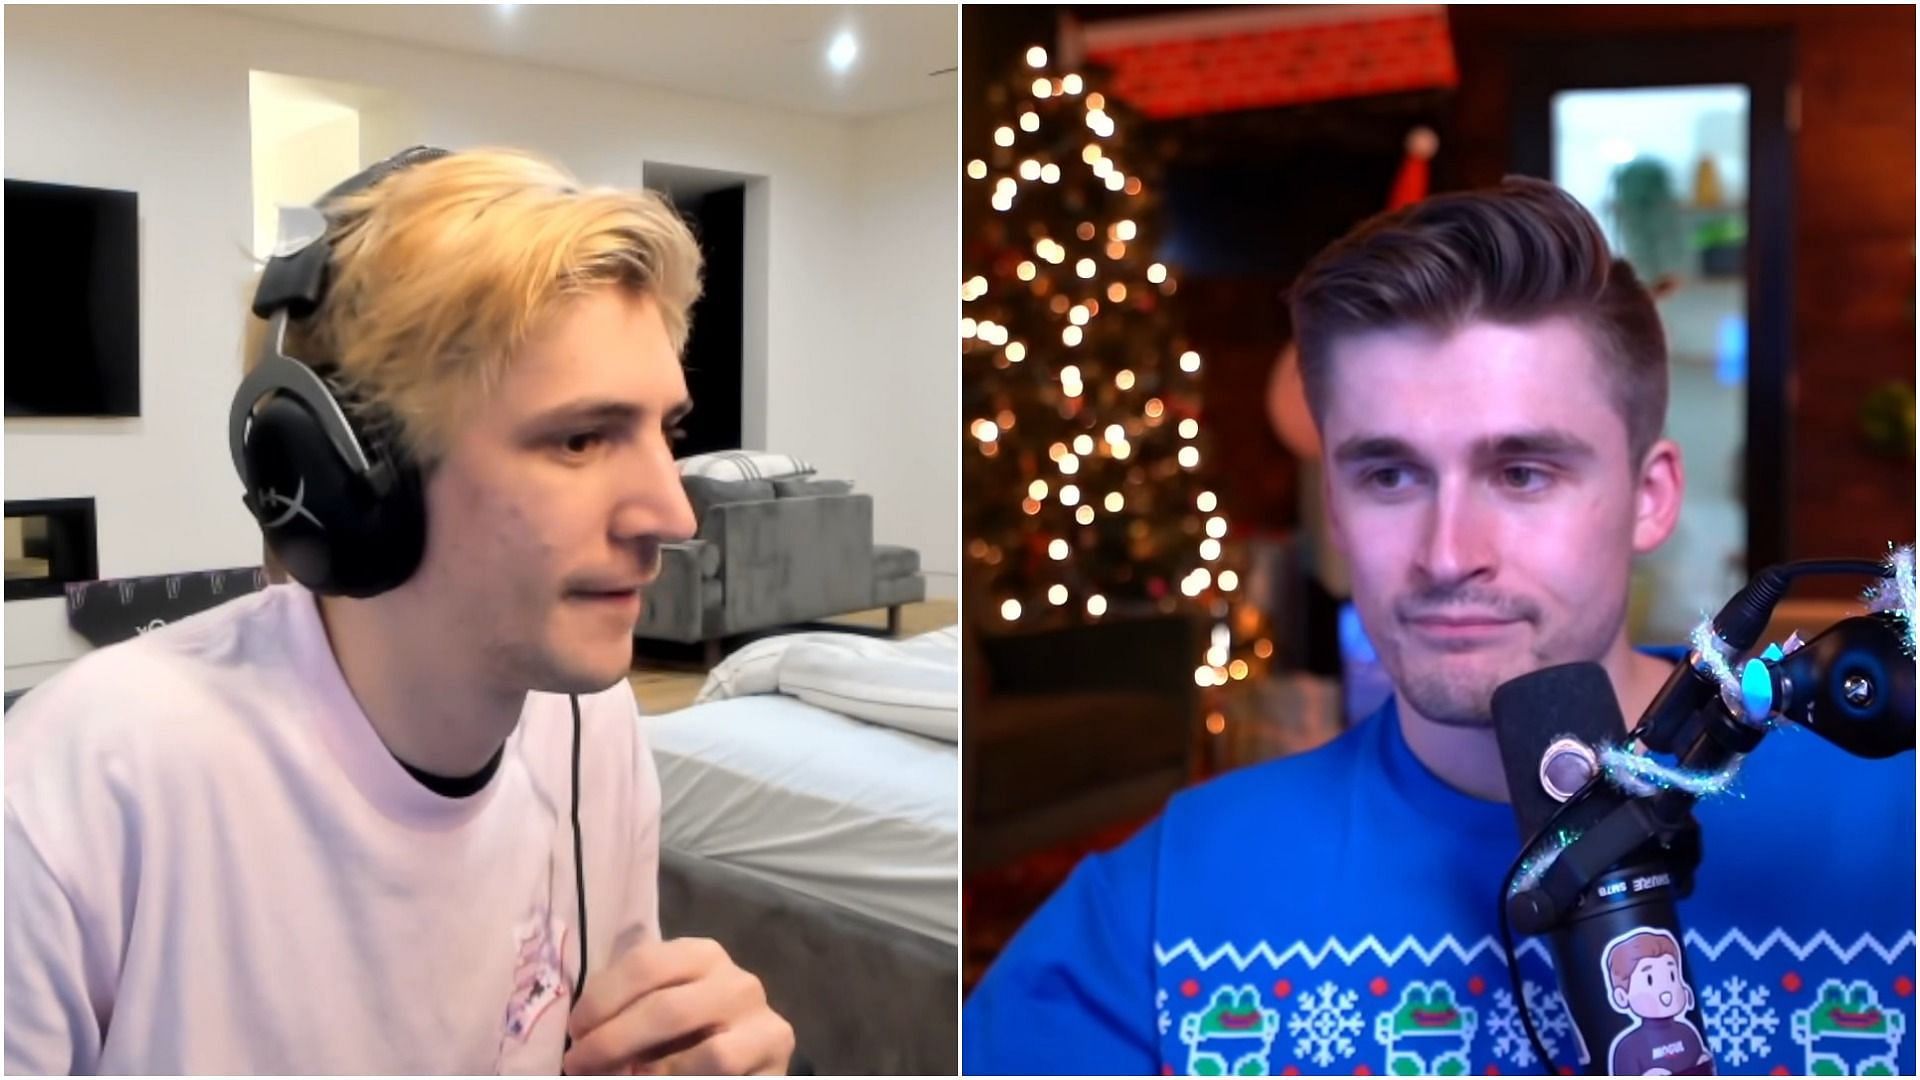 xQc fires back at Ludwig over his comments involving streaming copyrighted content (Image via Sportskeeda)